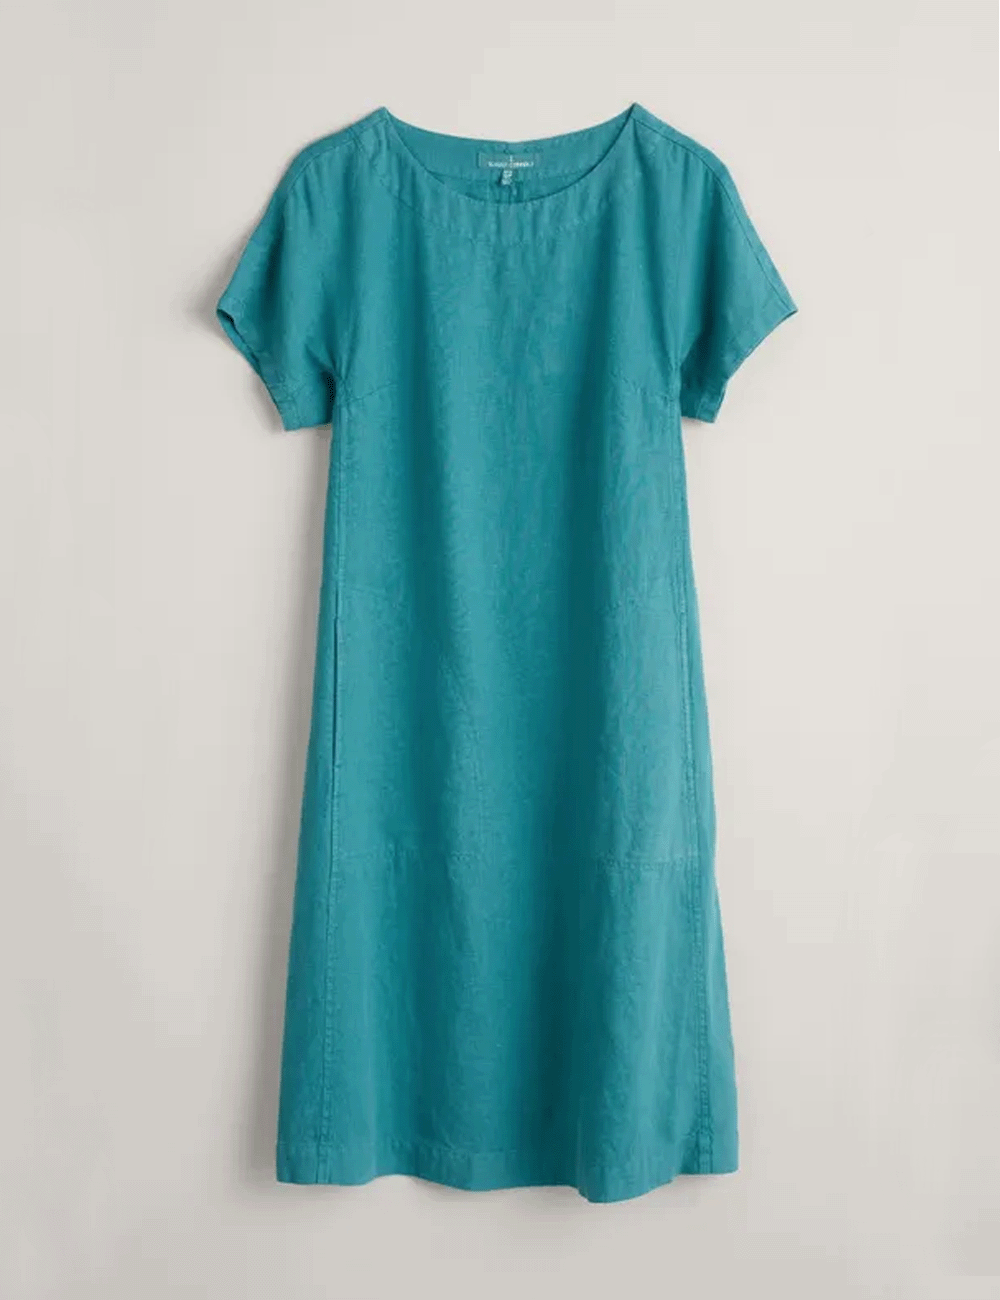 Seasalt's Primary Dress in Poseidon on a grey background